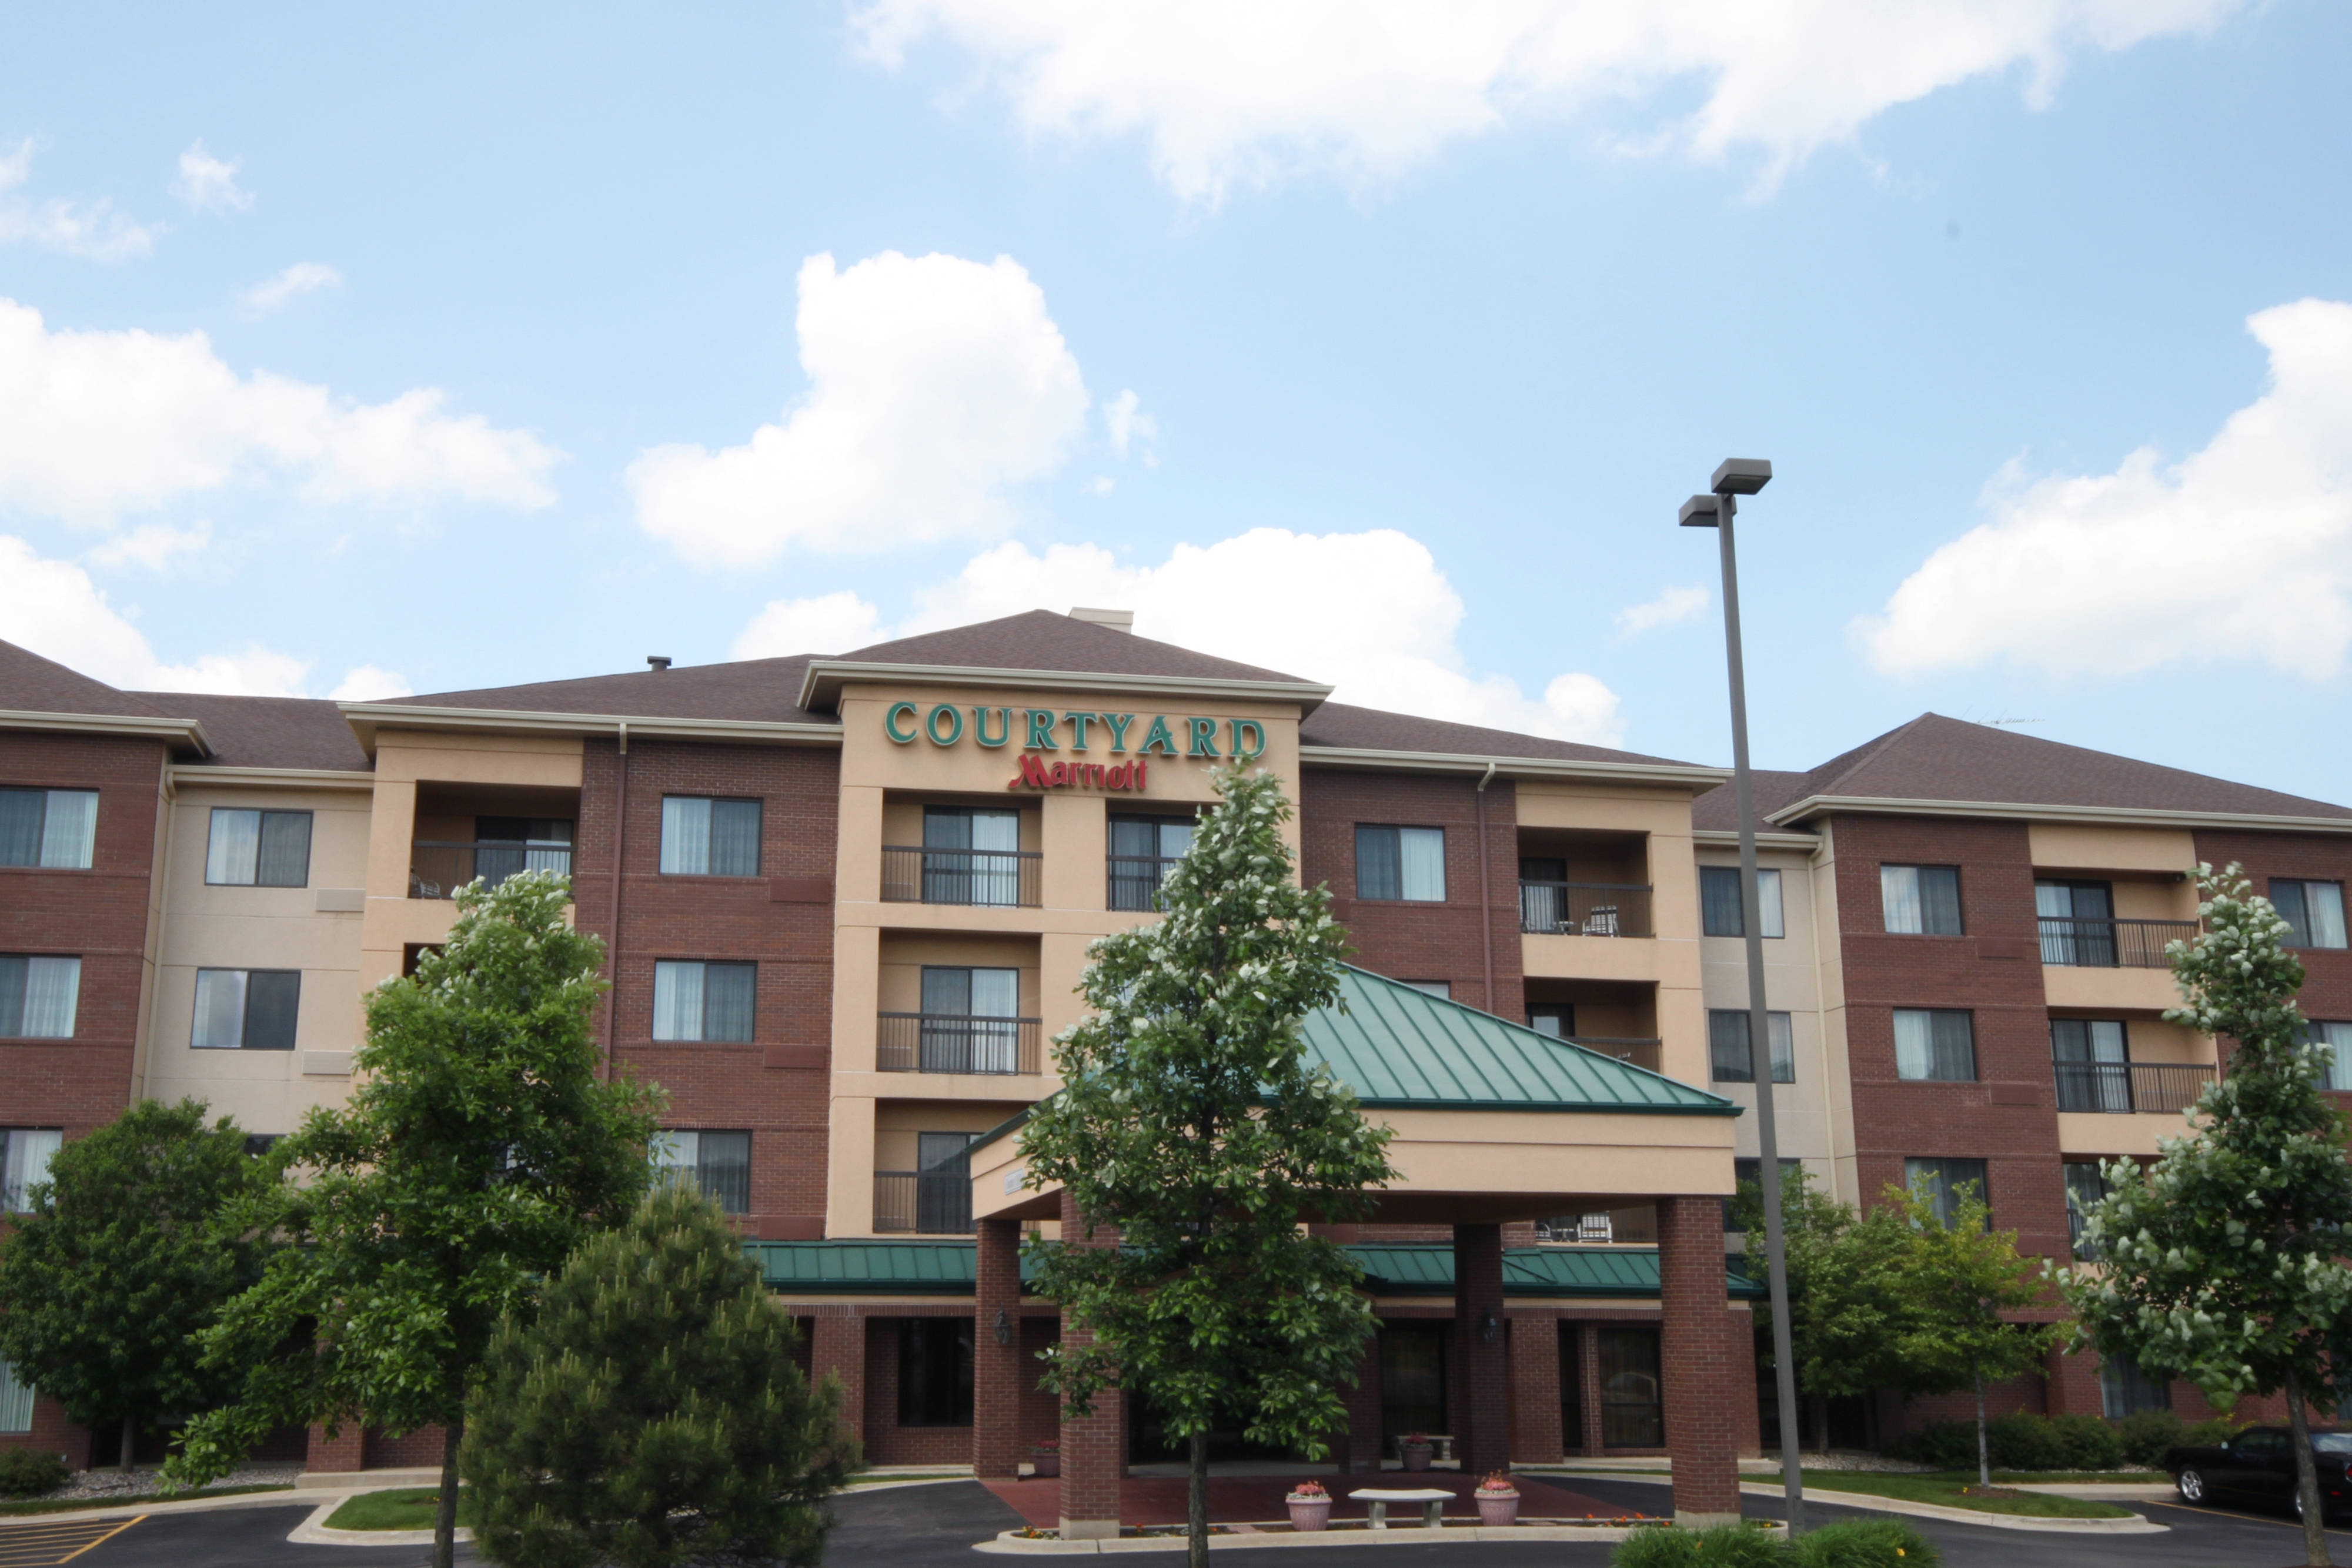 Photo of Courtyard by Marriott Chicago Bloomingdale, Bloomingdale, IL